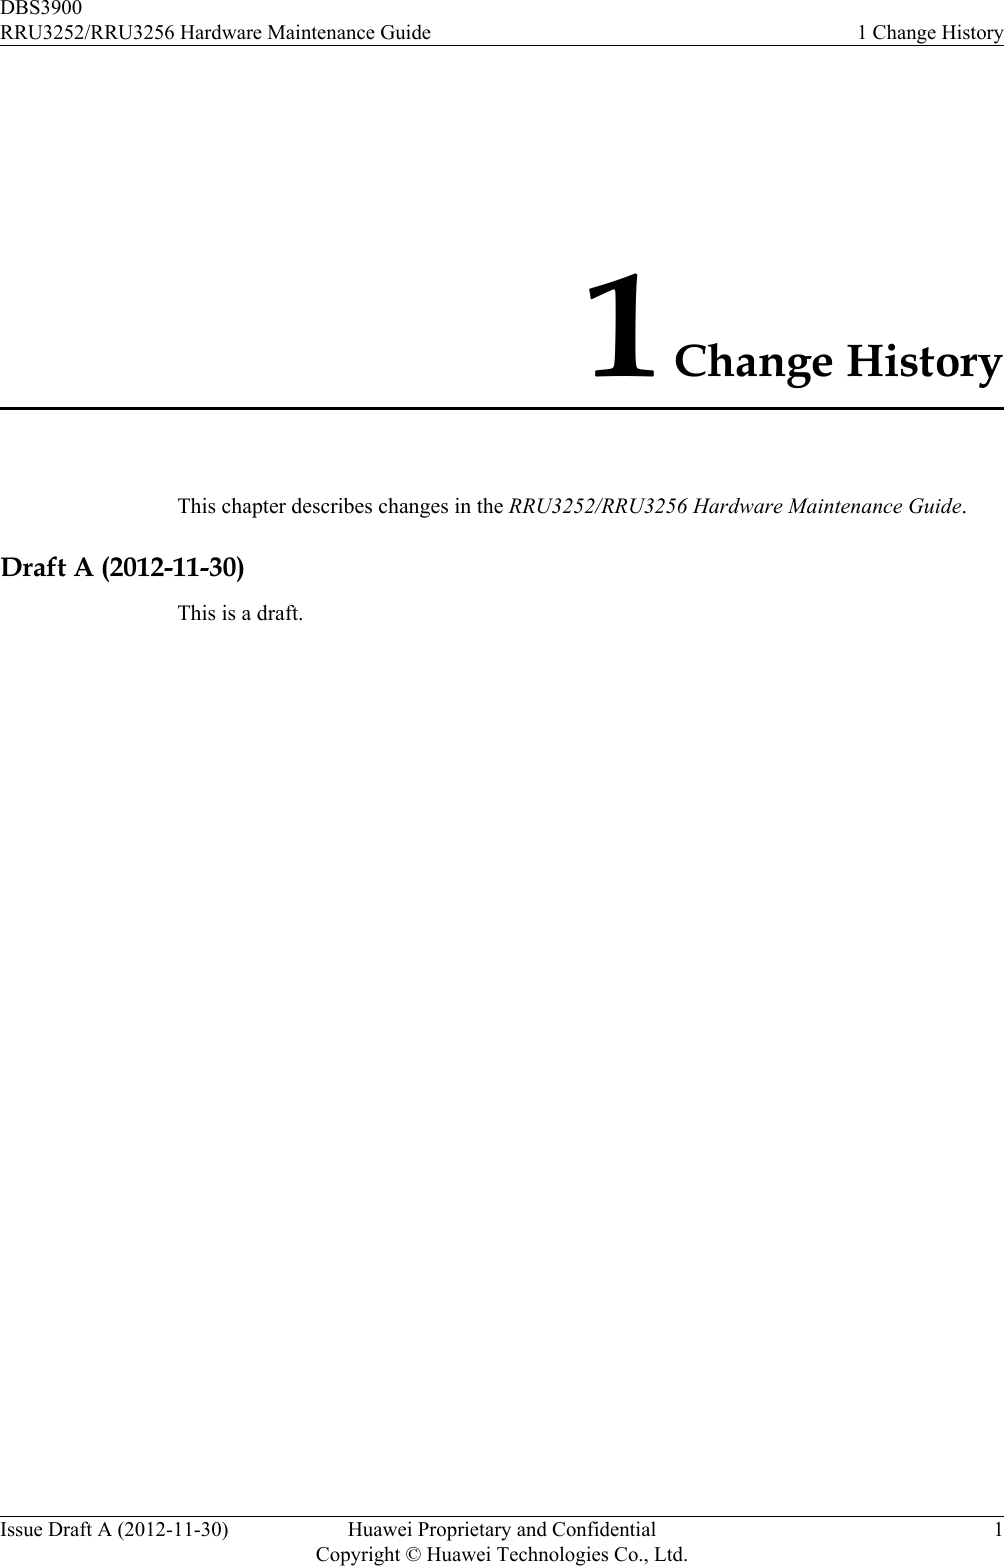 1 Change HistoryThis chapter describes changes in the RRU3252/RRU3256 Hardware Maintenance Guide.Draft A (2012-11-30)This is a draft.DBS3900RRU3252/RRU3256 Hardware Maintenance Guide 1 Change HistoryIssue Draft A (2012-11-30) Huawei Proprietary and ConfidentialCopyright © Huawei Technologies Co., Ltd.1